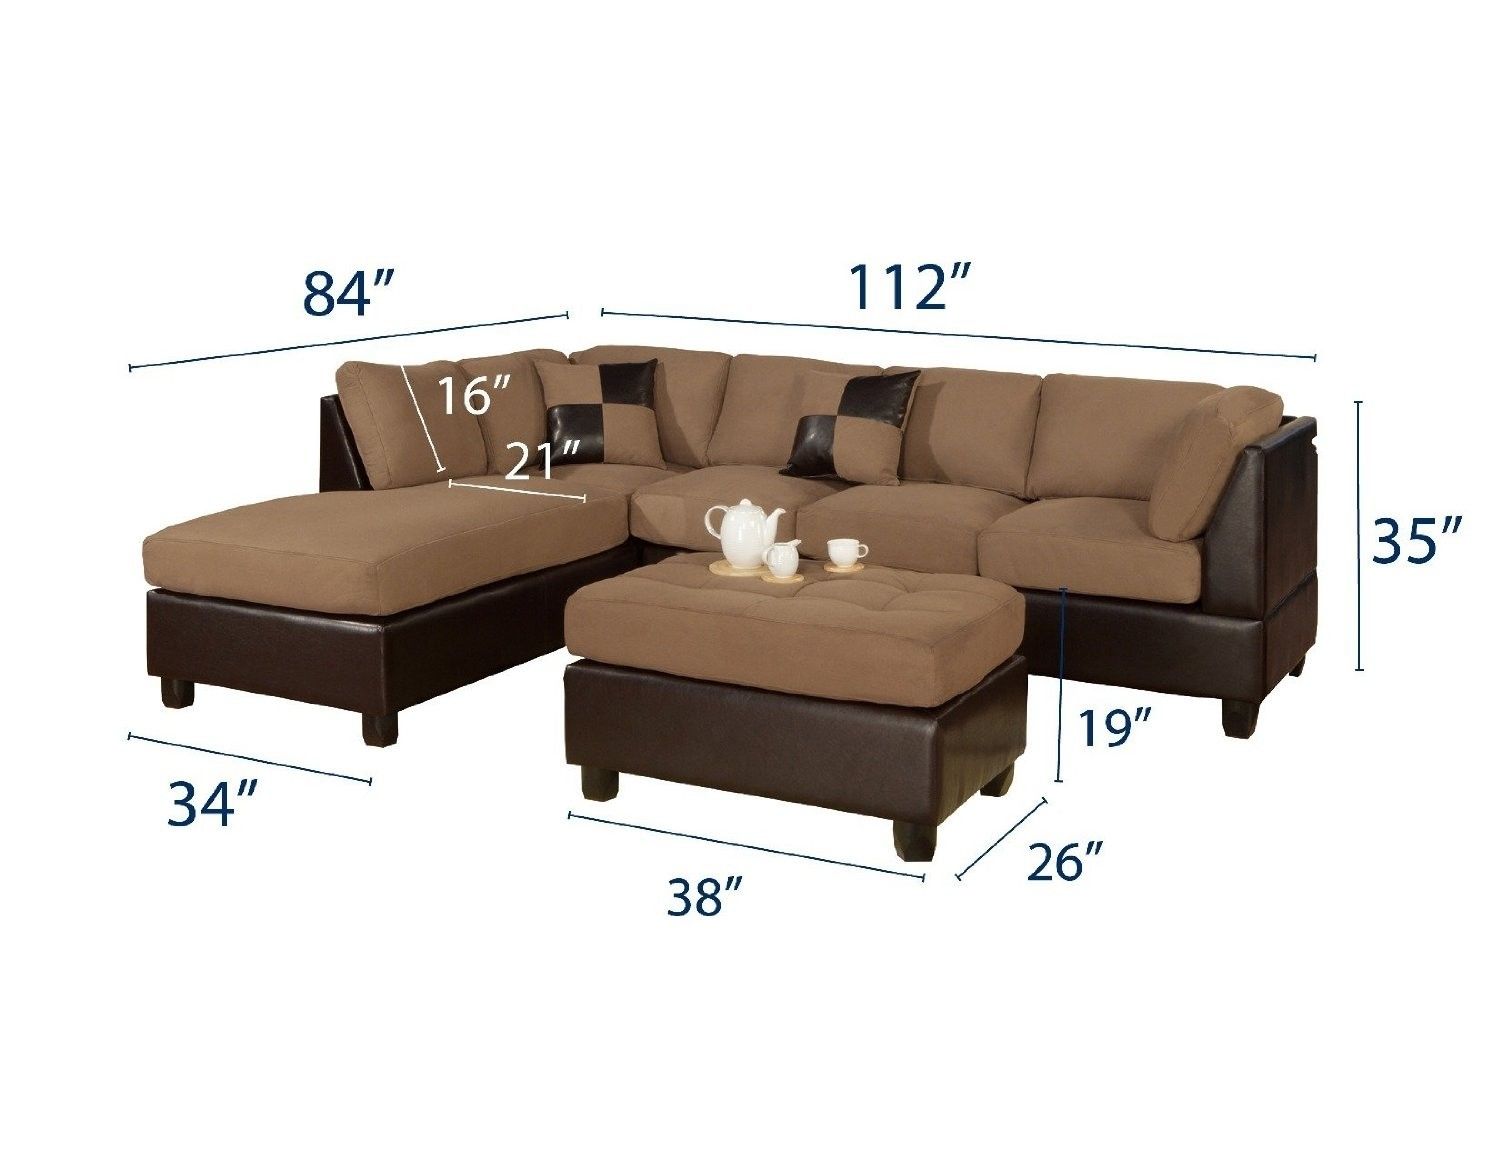 84 Inch Sectional Sofa Inspirational Magnolia Homejoanna Gaines Within Magnolia Home Homestead 4 Piece Sectionals By Joanna Gaines (View 28 of 30)